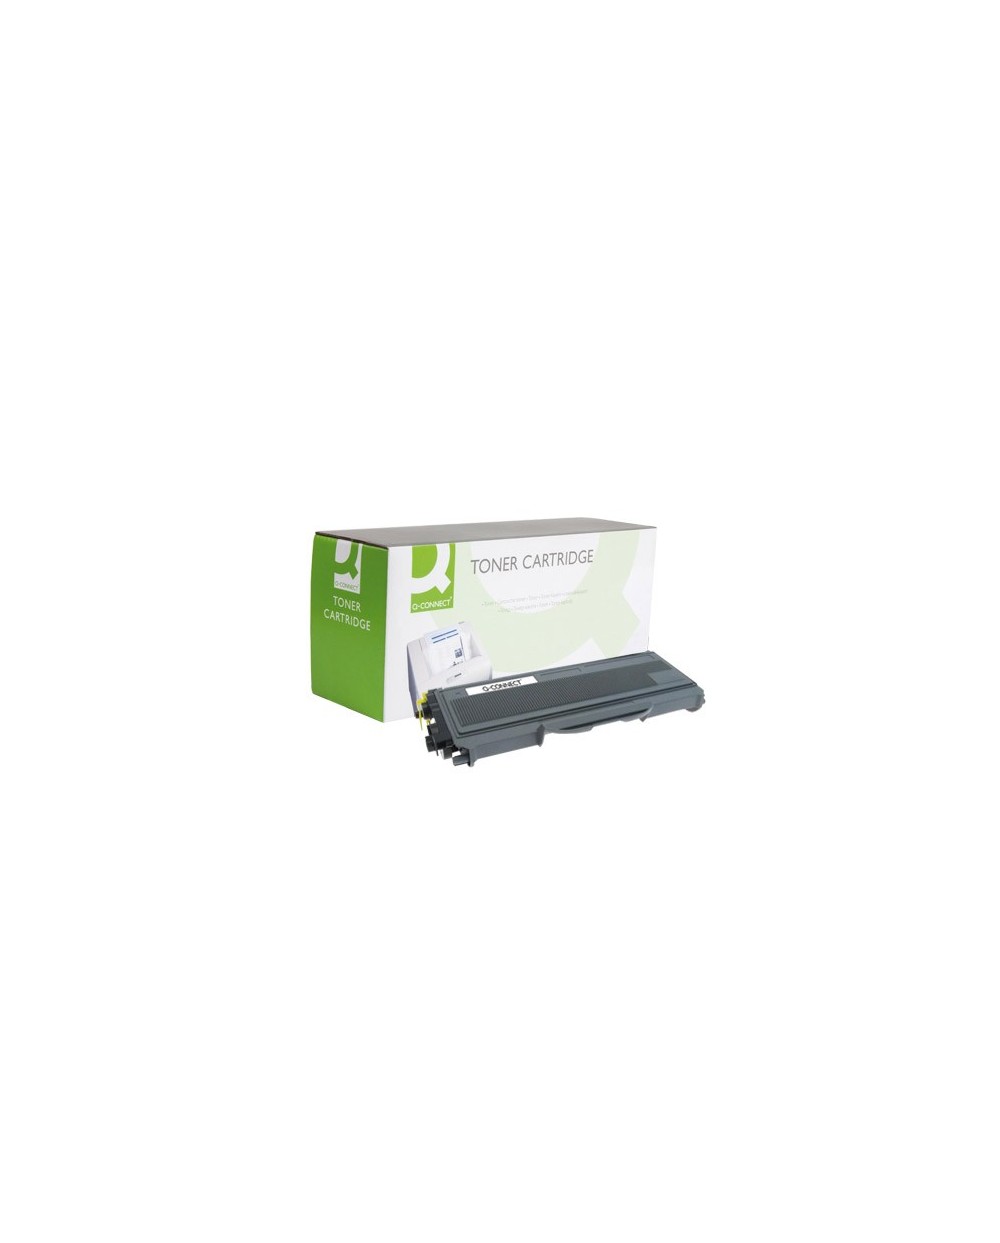 Toner q connect compatible brother tn 2120 2600pag negro